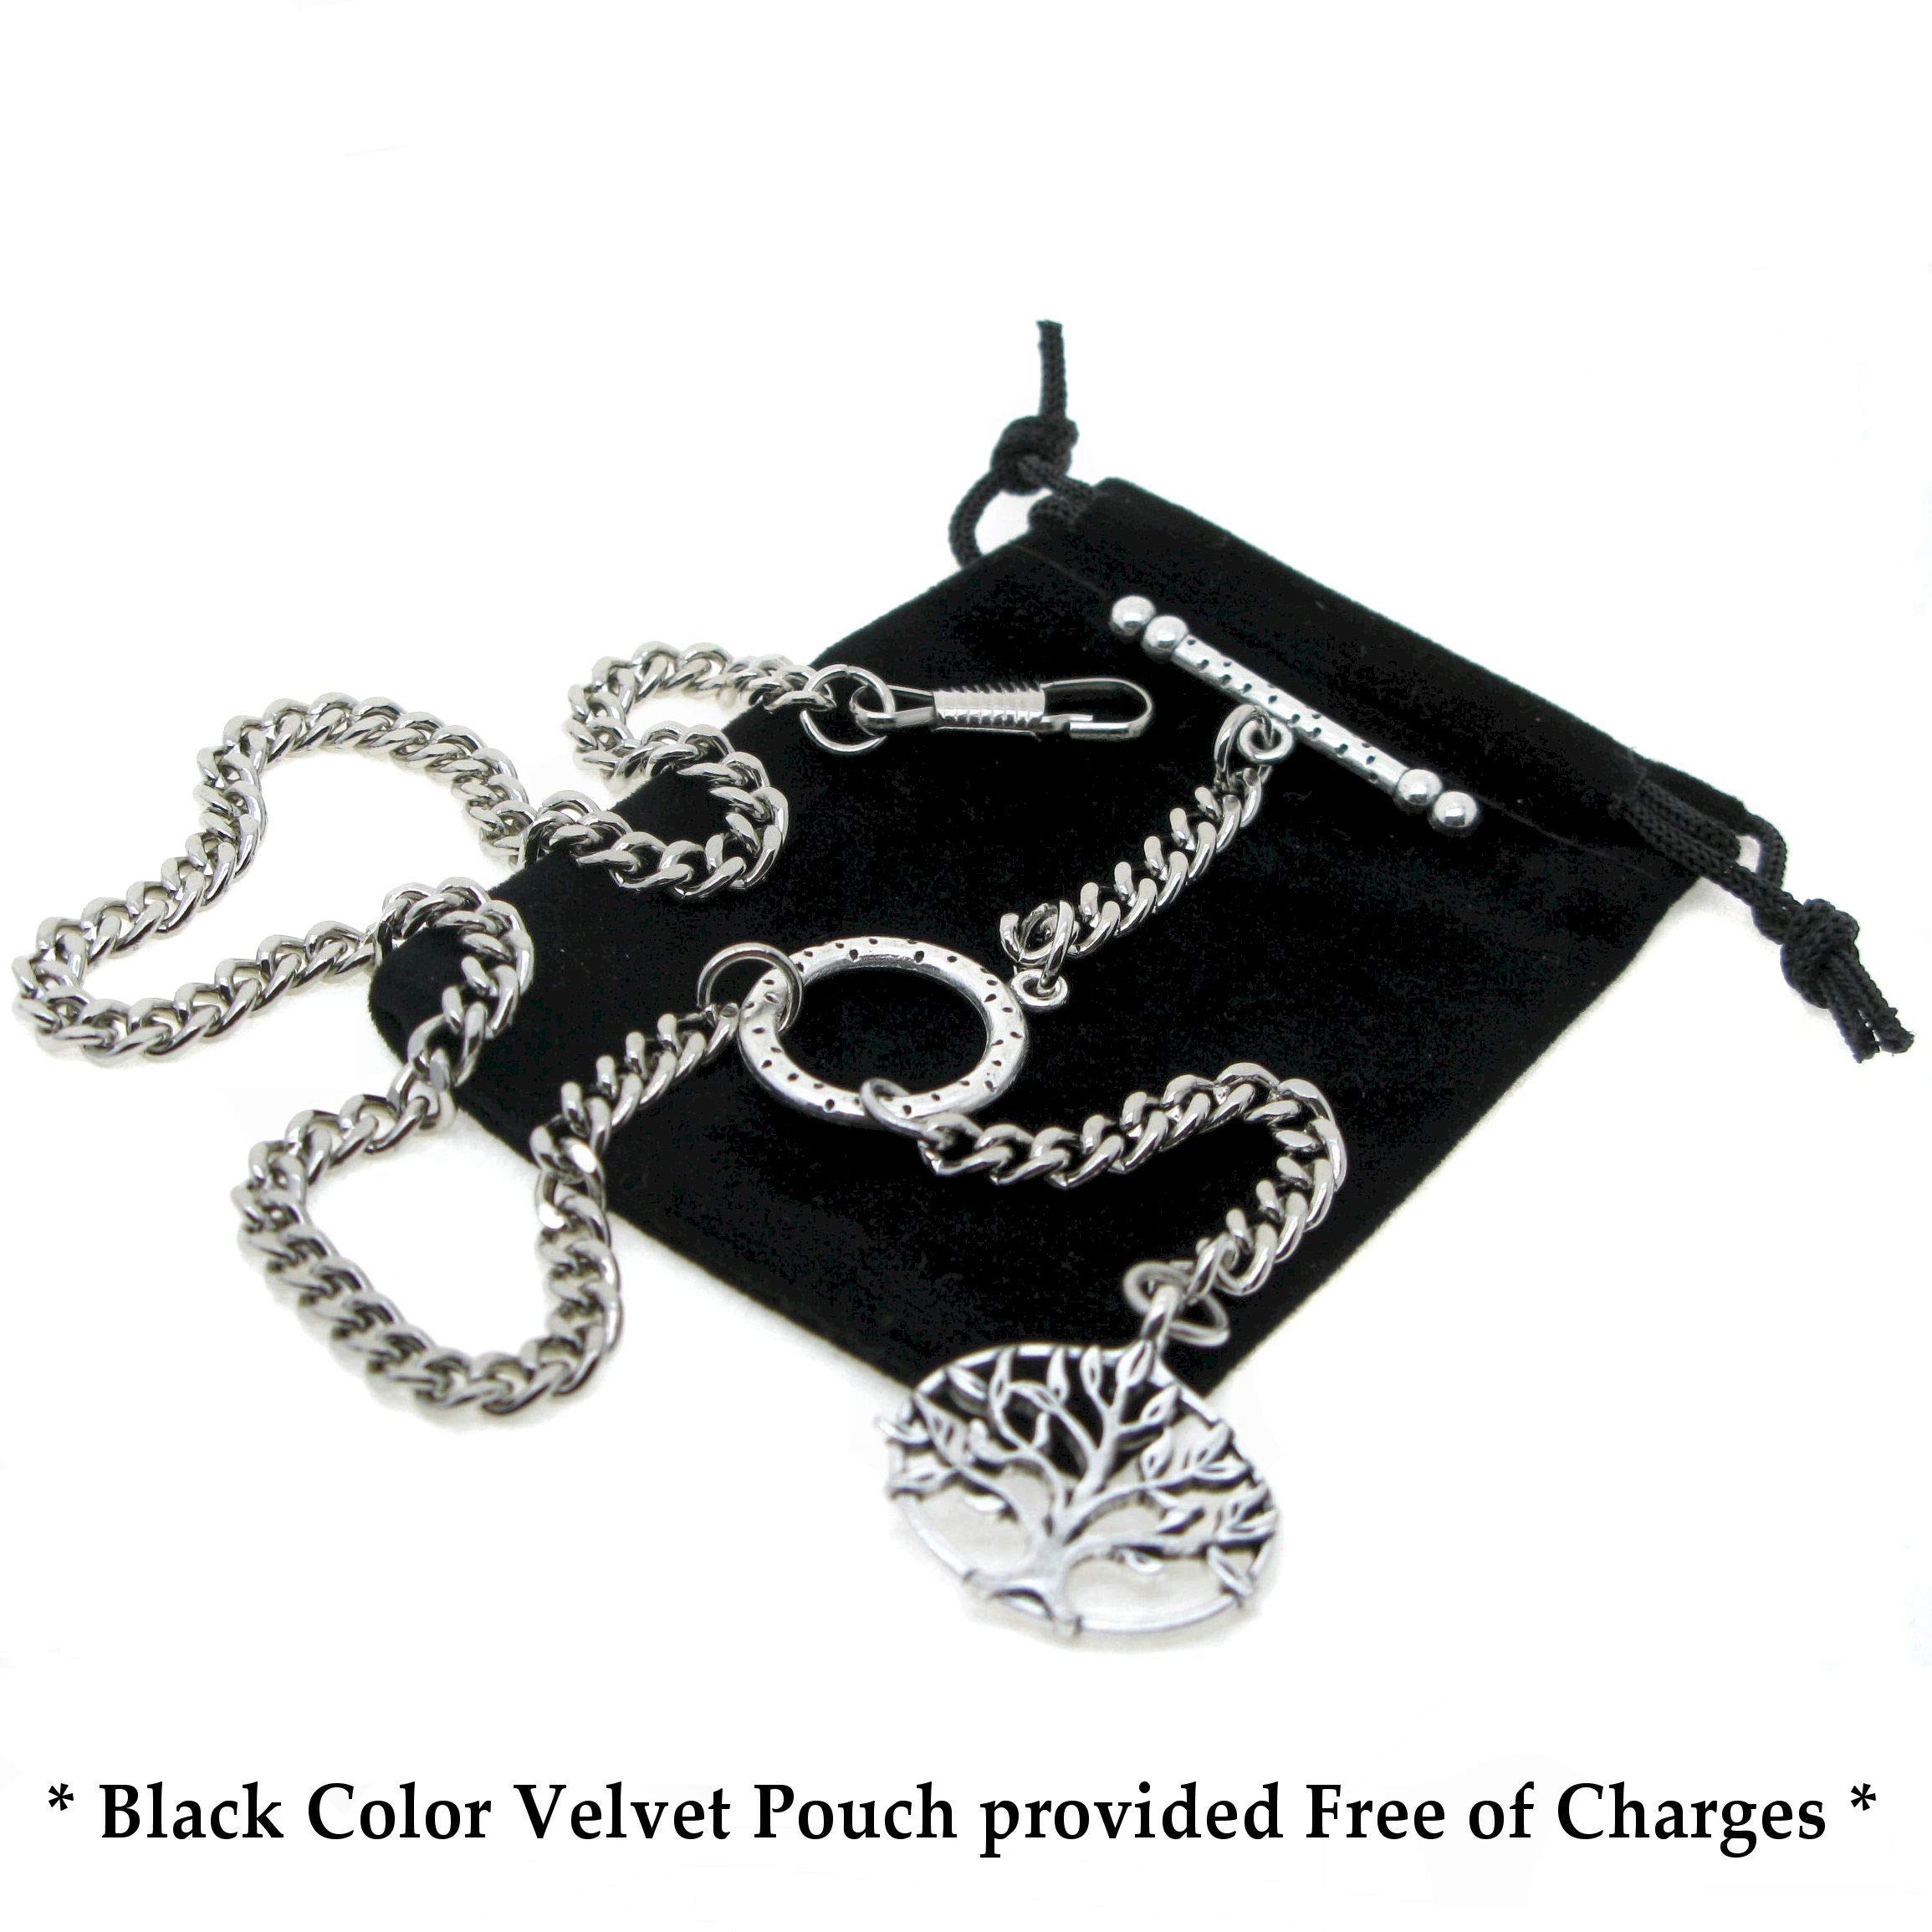 Albert Chain Pocket Silver Color Watch Chains for Men - 2 Ways Usage on Vests & Trousers or Jeans with Life Tree Design Fob T Bar ACT12